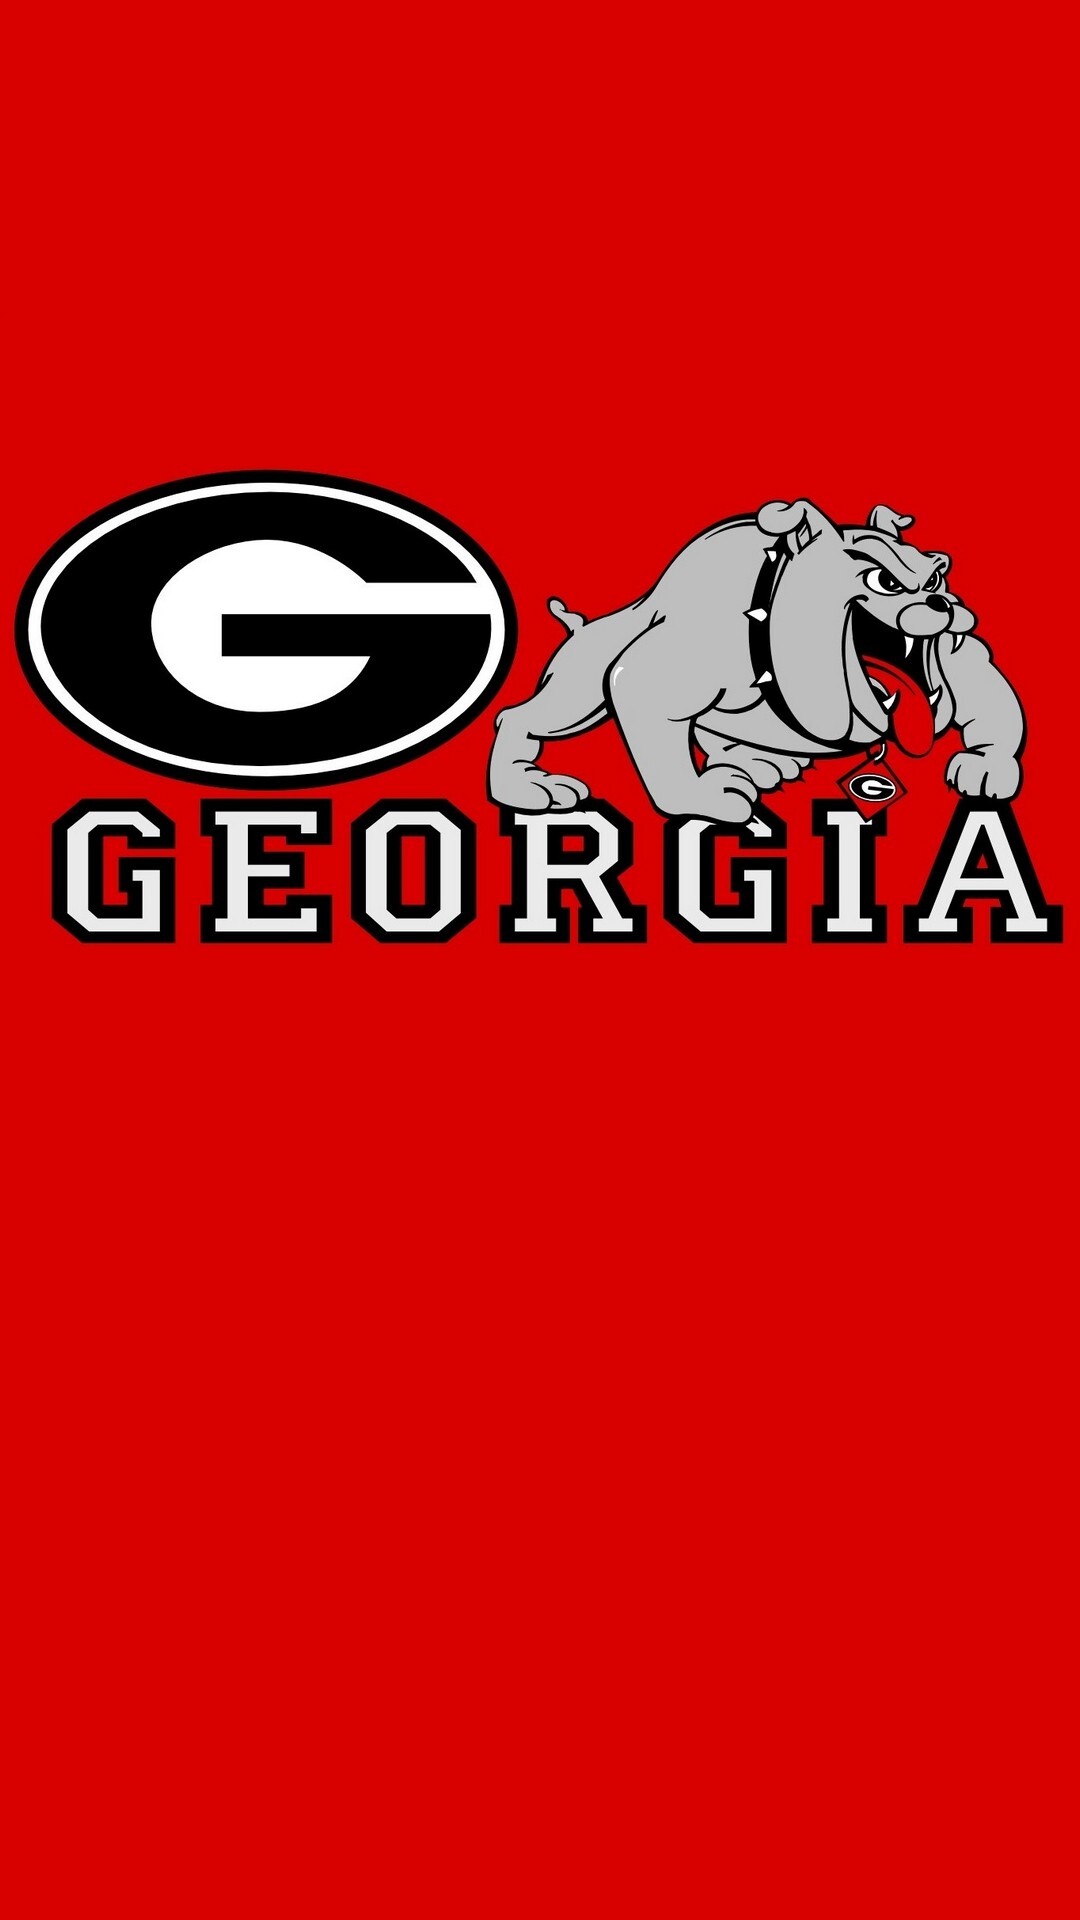 Georgia Bulldogs: Team that defeated Alabama in the CFP National Championship Game in 2021. 1080x1920 Full HD Wallpaper.